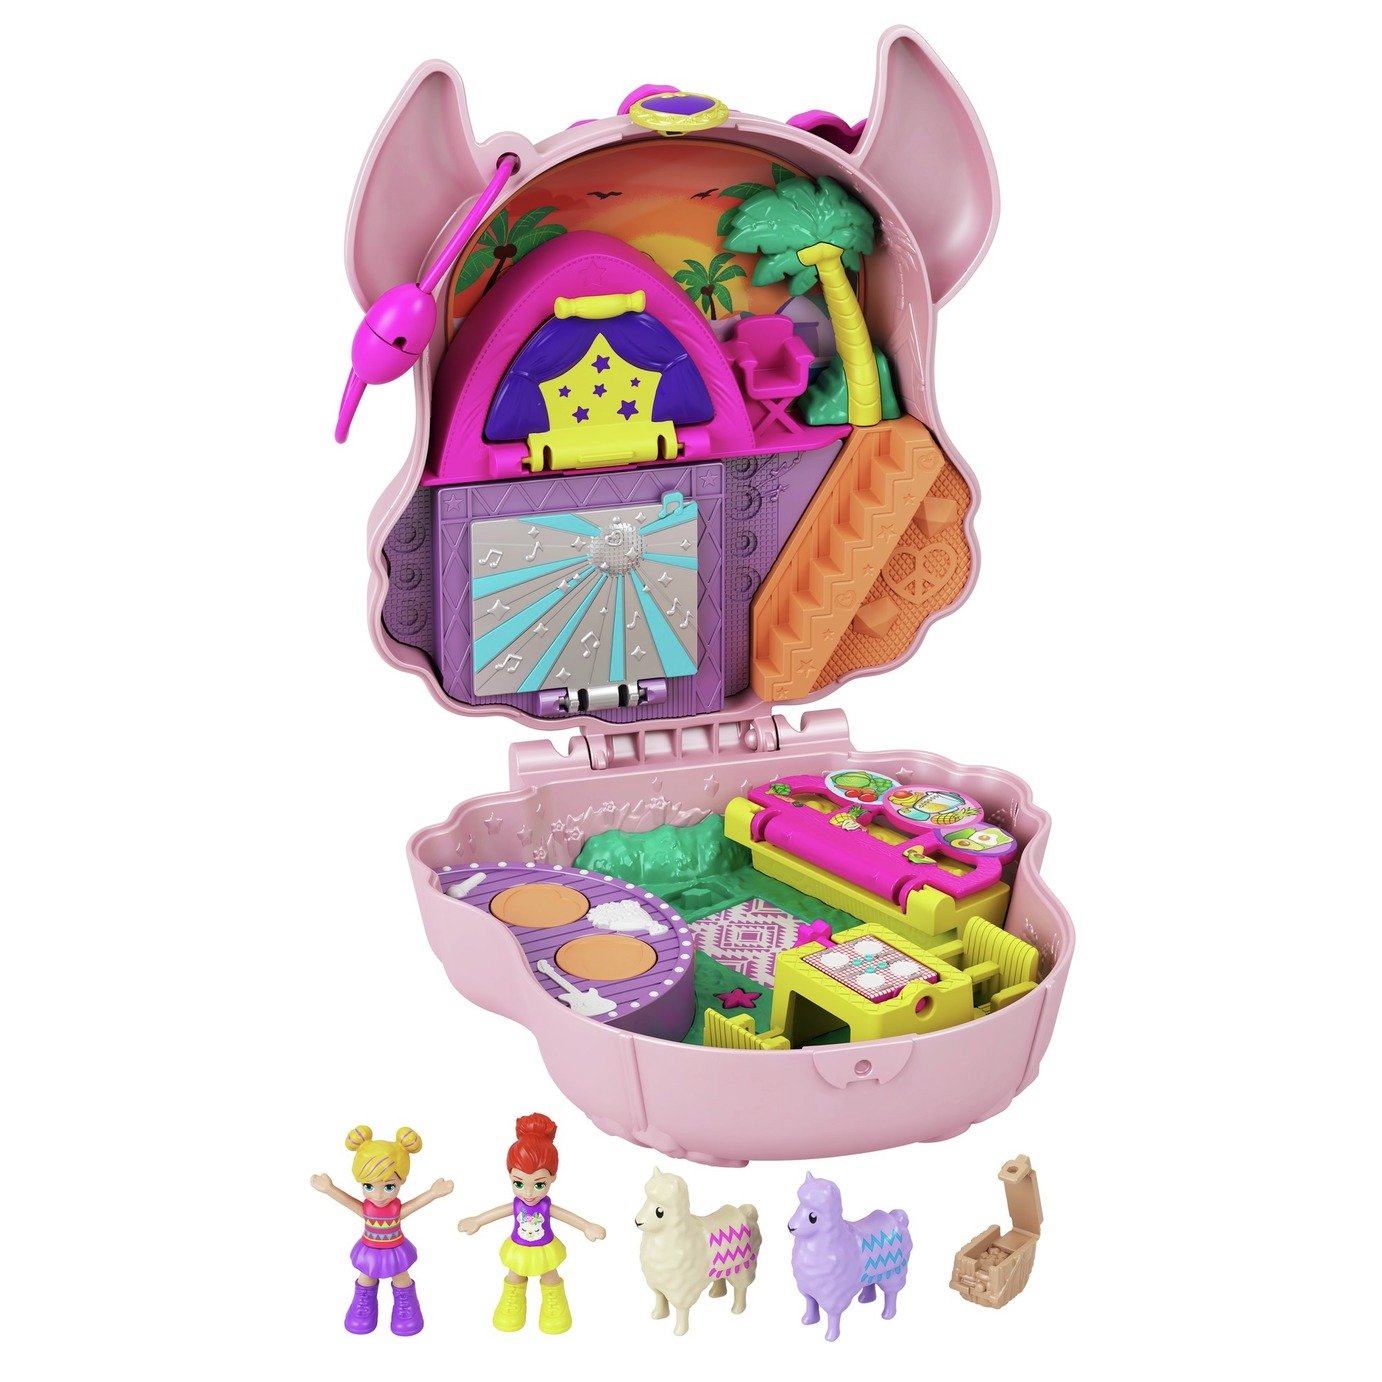 Polly Pocket Polly and Lila Llama Concert Playset Review